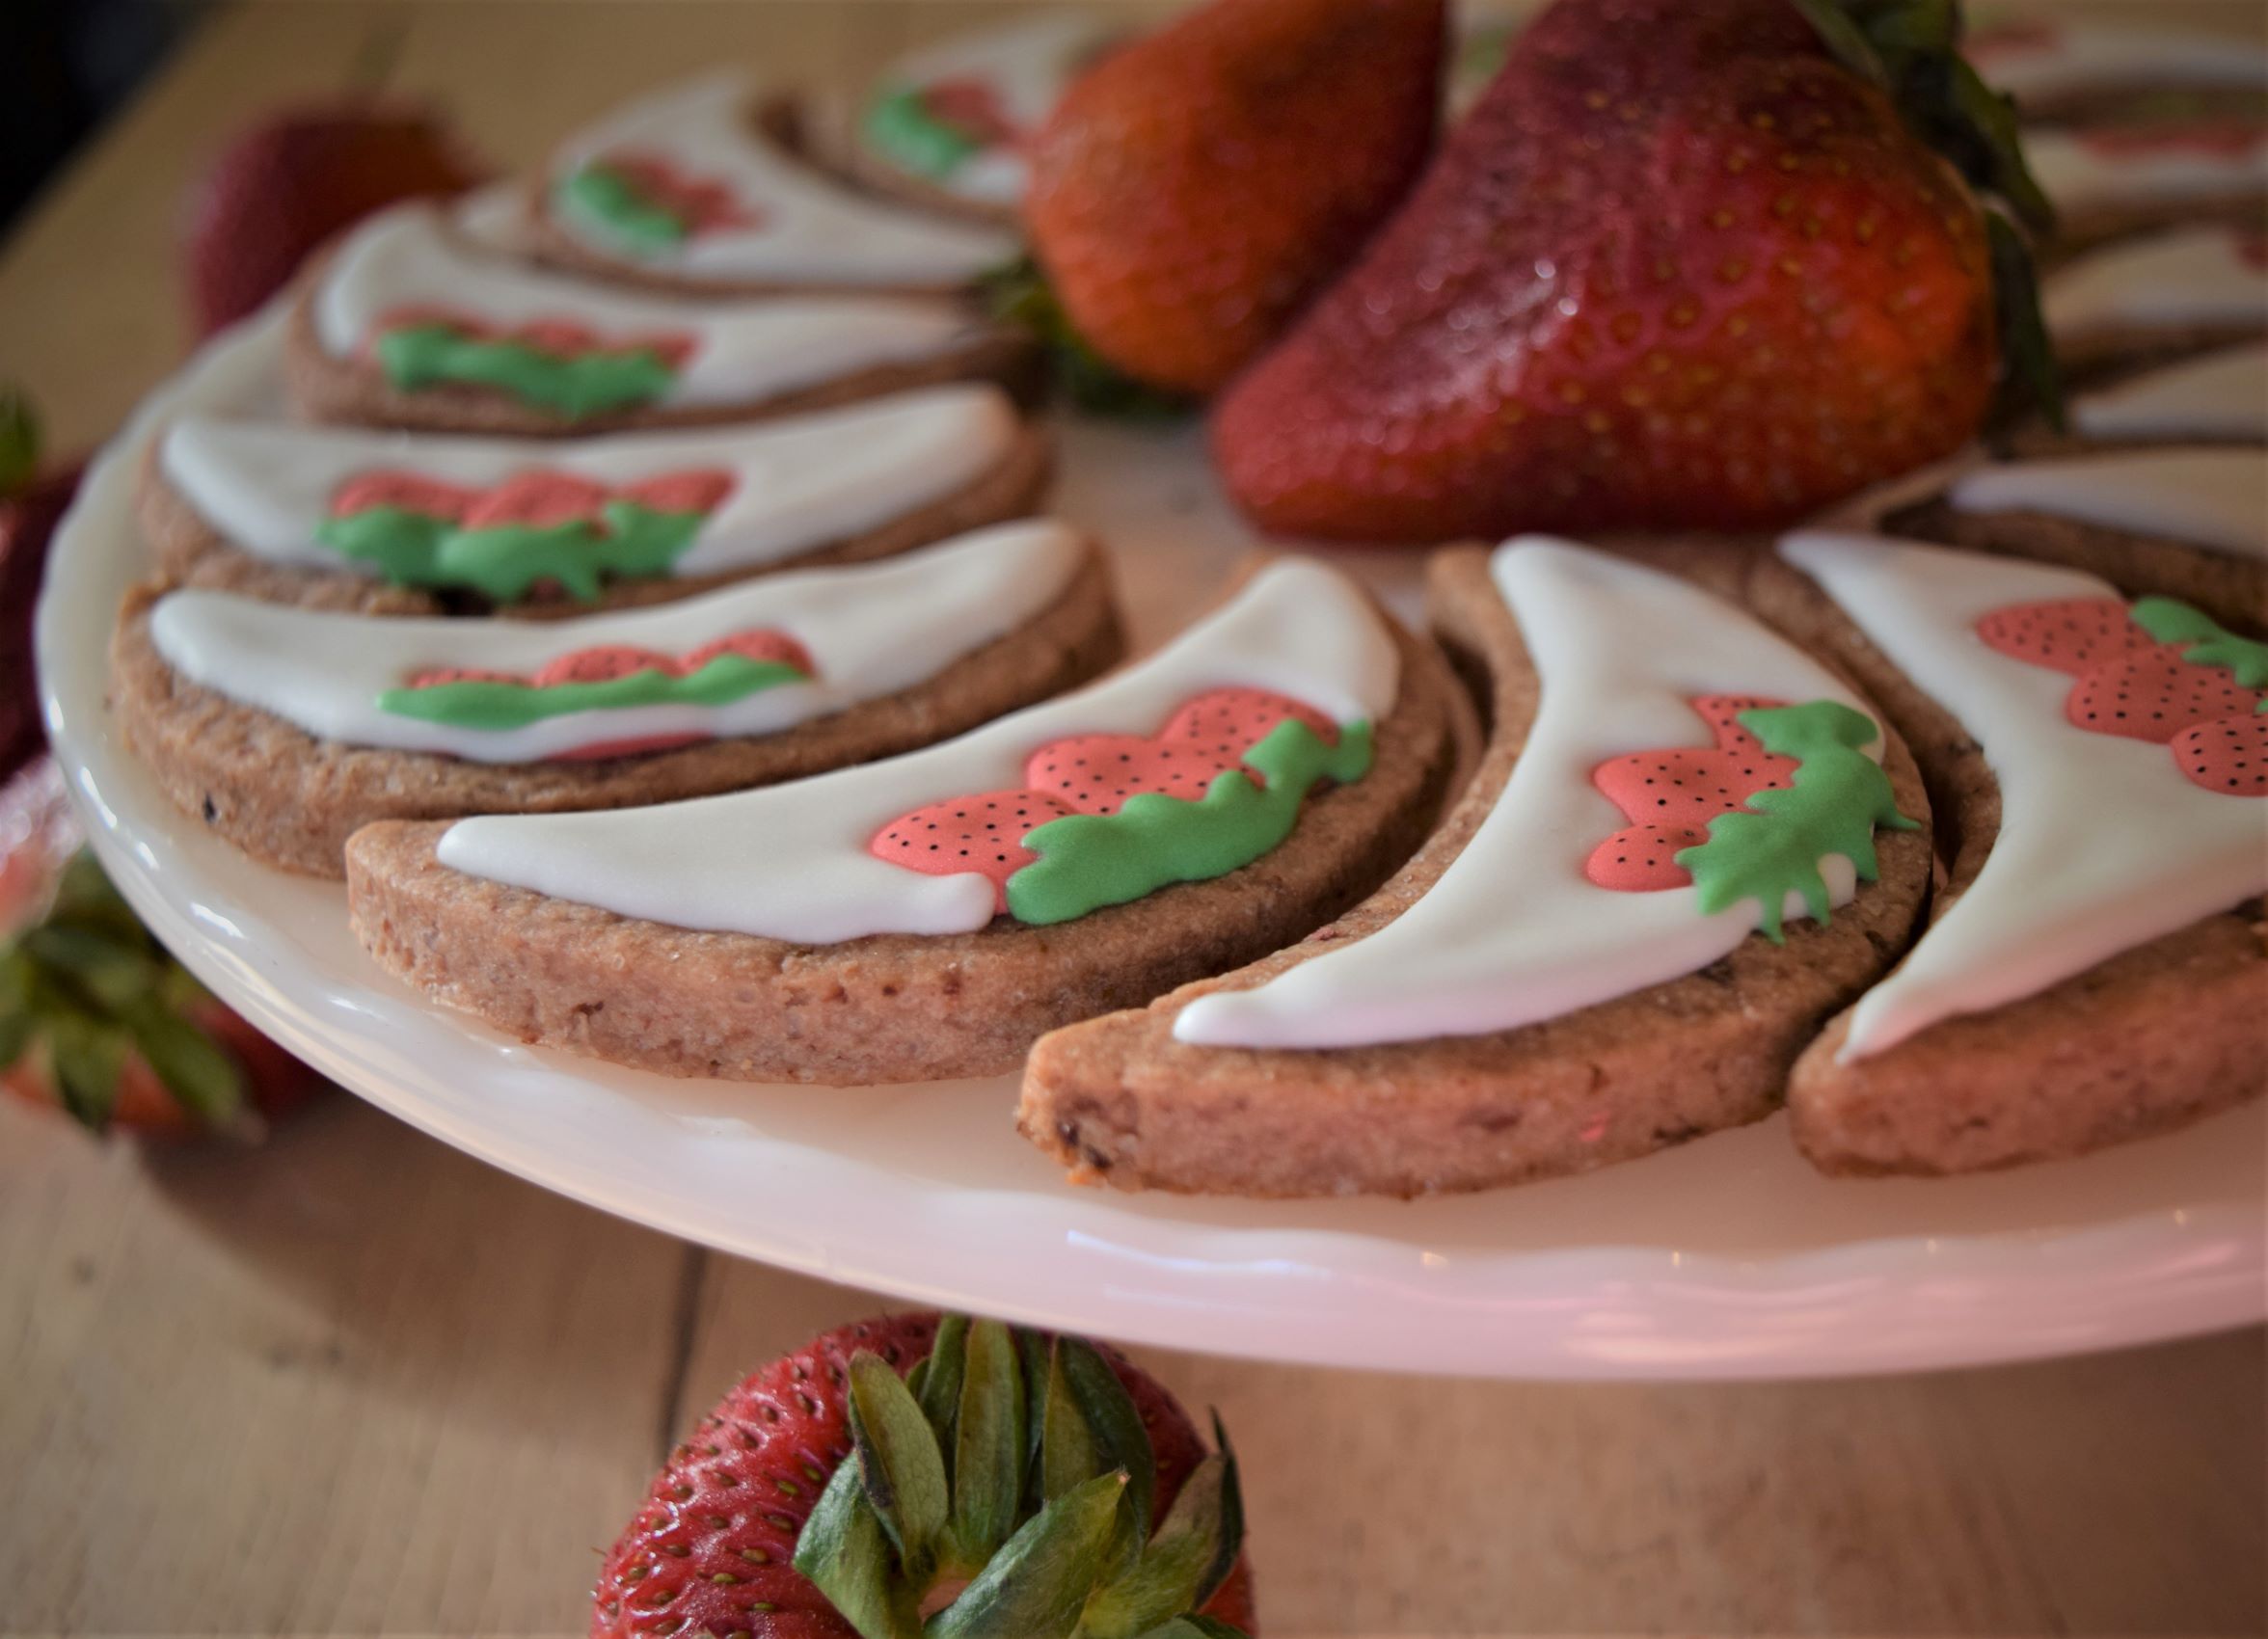 strawberry moon cookies royal icing, decorating, crescent, full moon, red, baking, berry recipes, summer, fruit